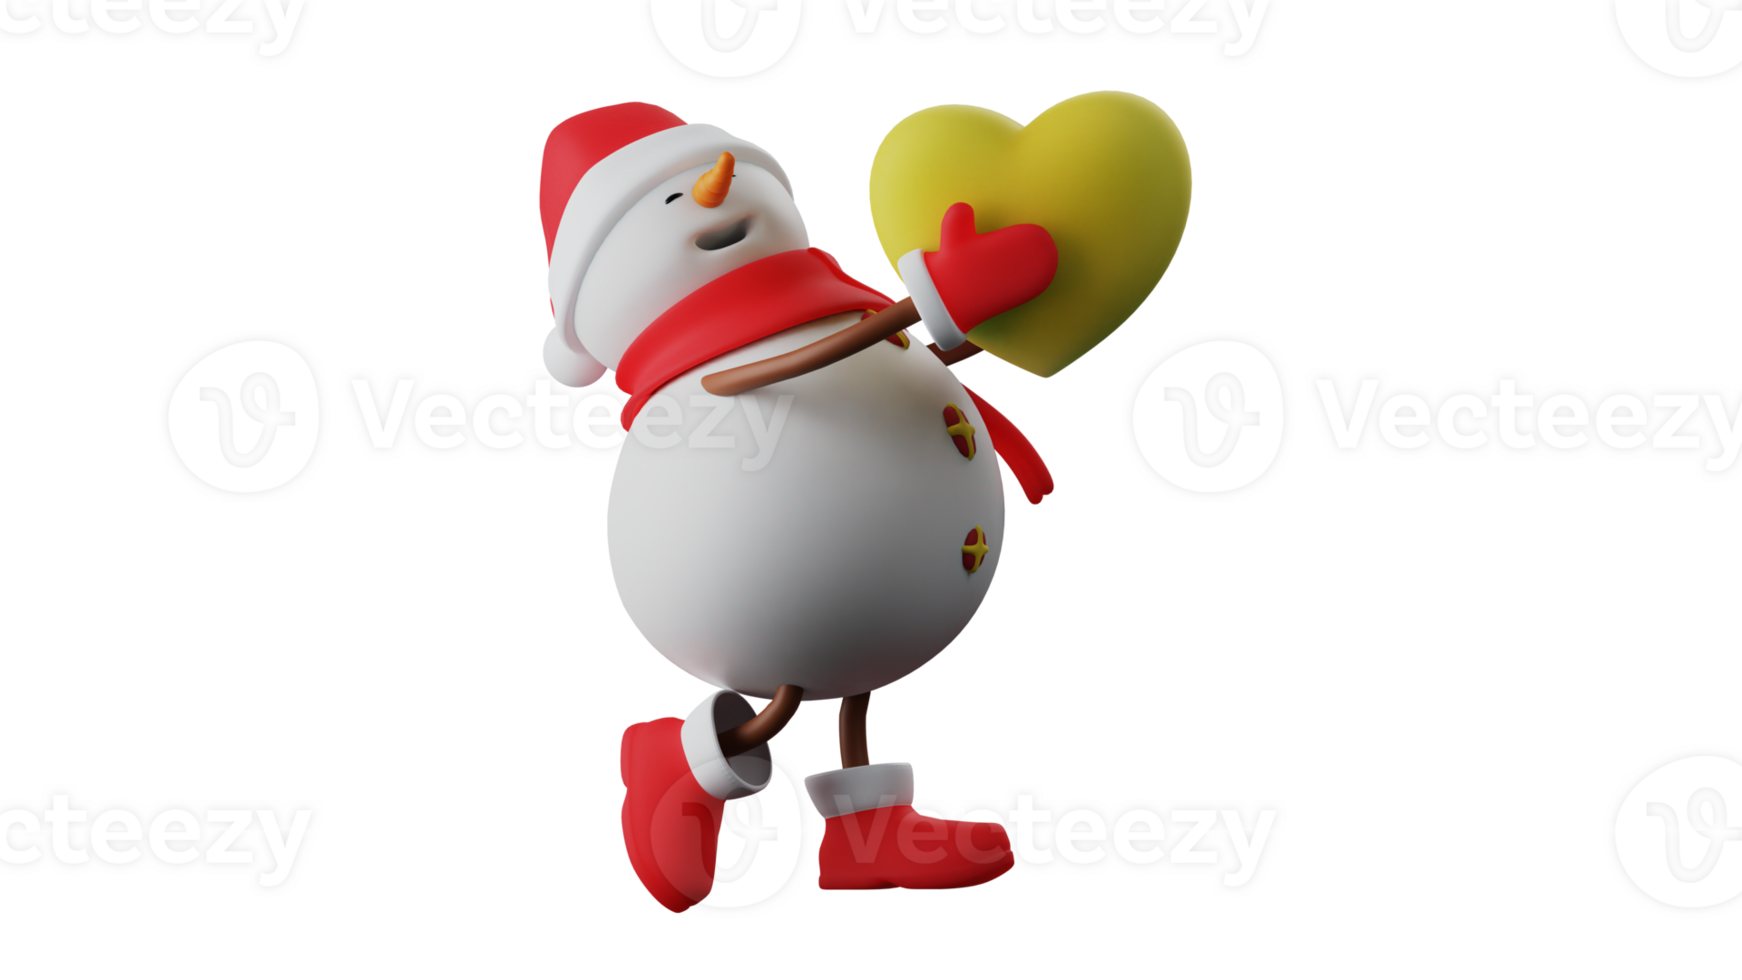 3D illustration. Adorable Snowman 3D cartoon character. Sowman is standing and holding up a yellow love symbol. Snowman laughs happily. Christmas Snowman wearing a red costume. 3D cartoon character png